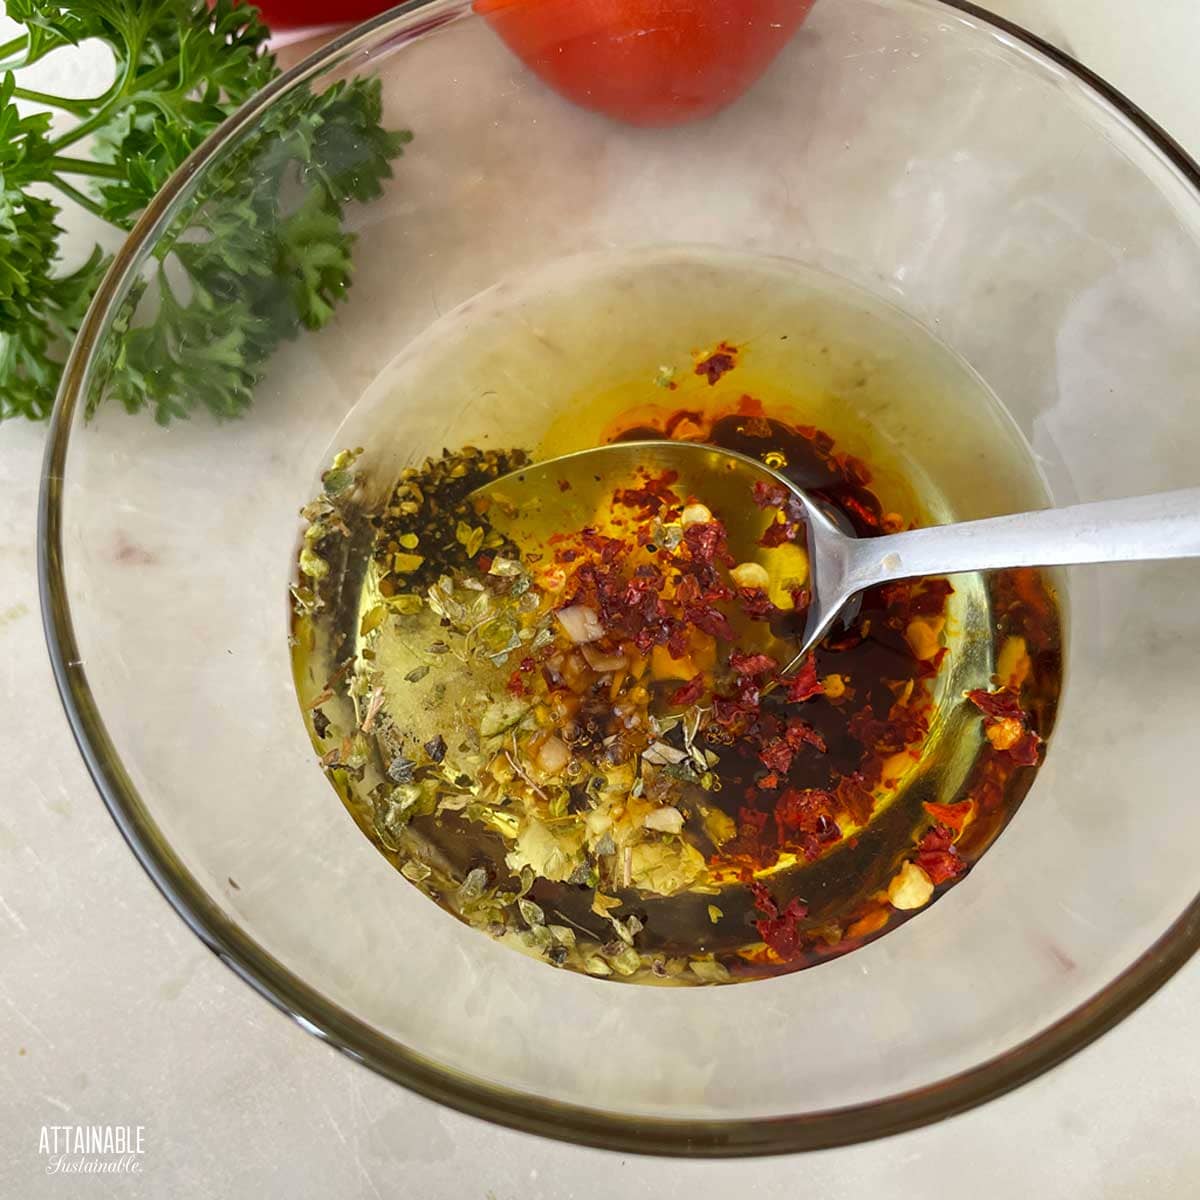 A clear bowl with the marinade ingredients being stirred with a spoon, with fresh herbs and tomatoes in the background.